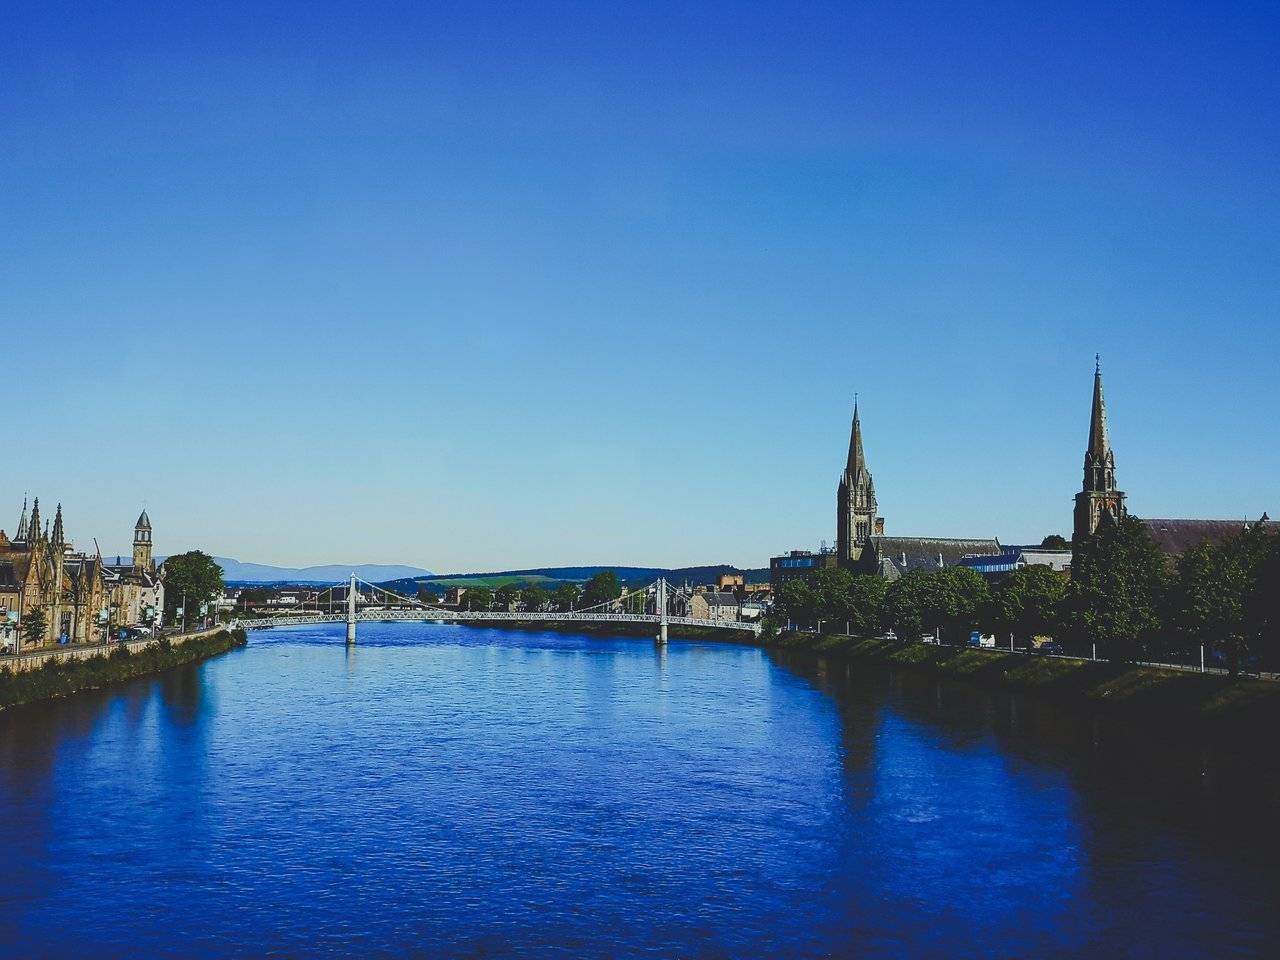   Greig Street Bridge in Inverness during a nice summer day, Scotland. Photo by Alis Monte [CC BY-SA 4.0], via Connecting the Dots